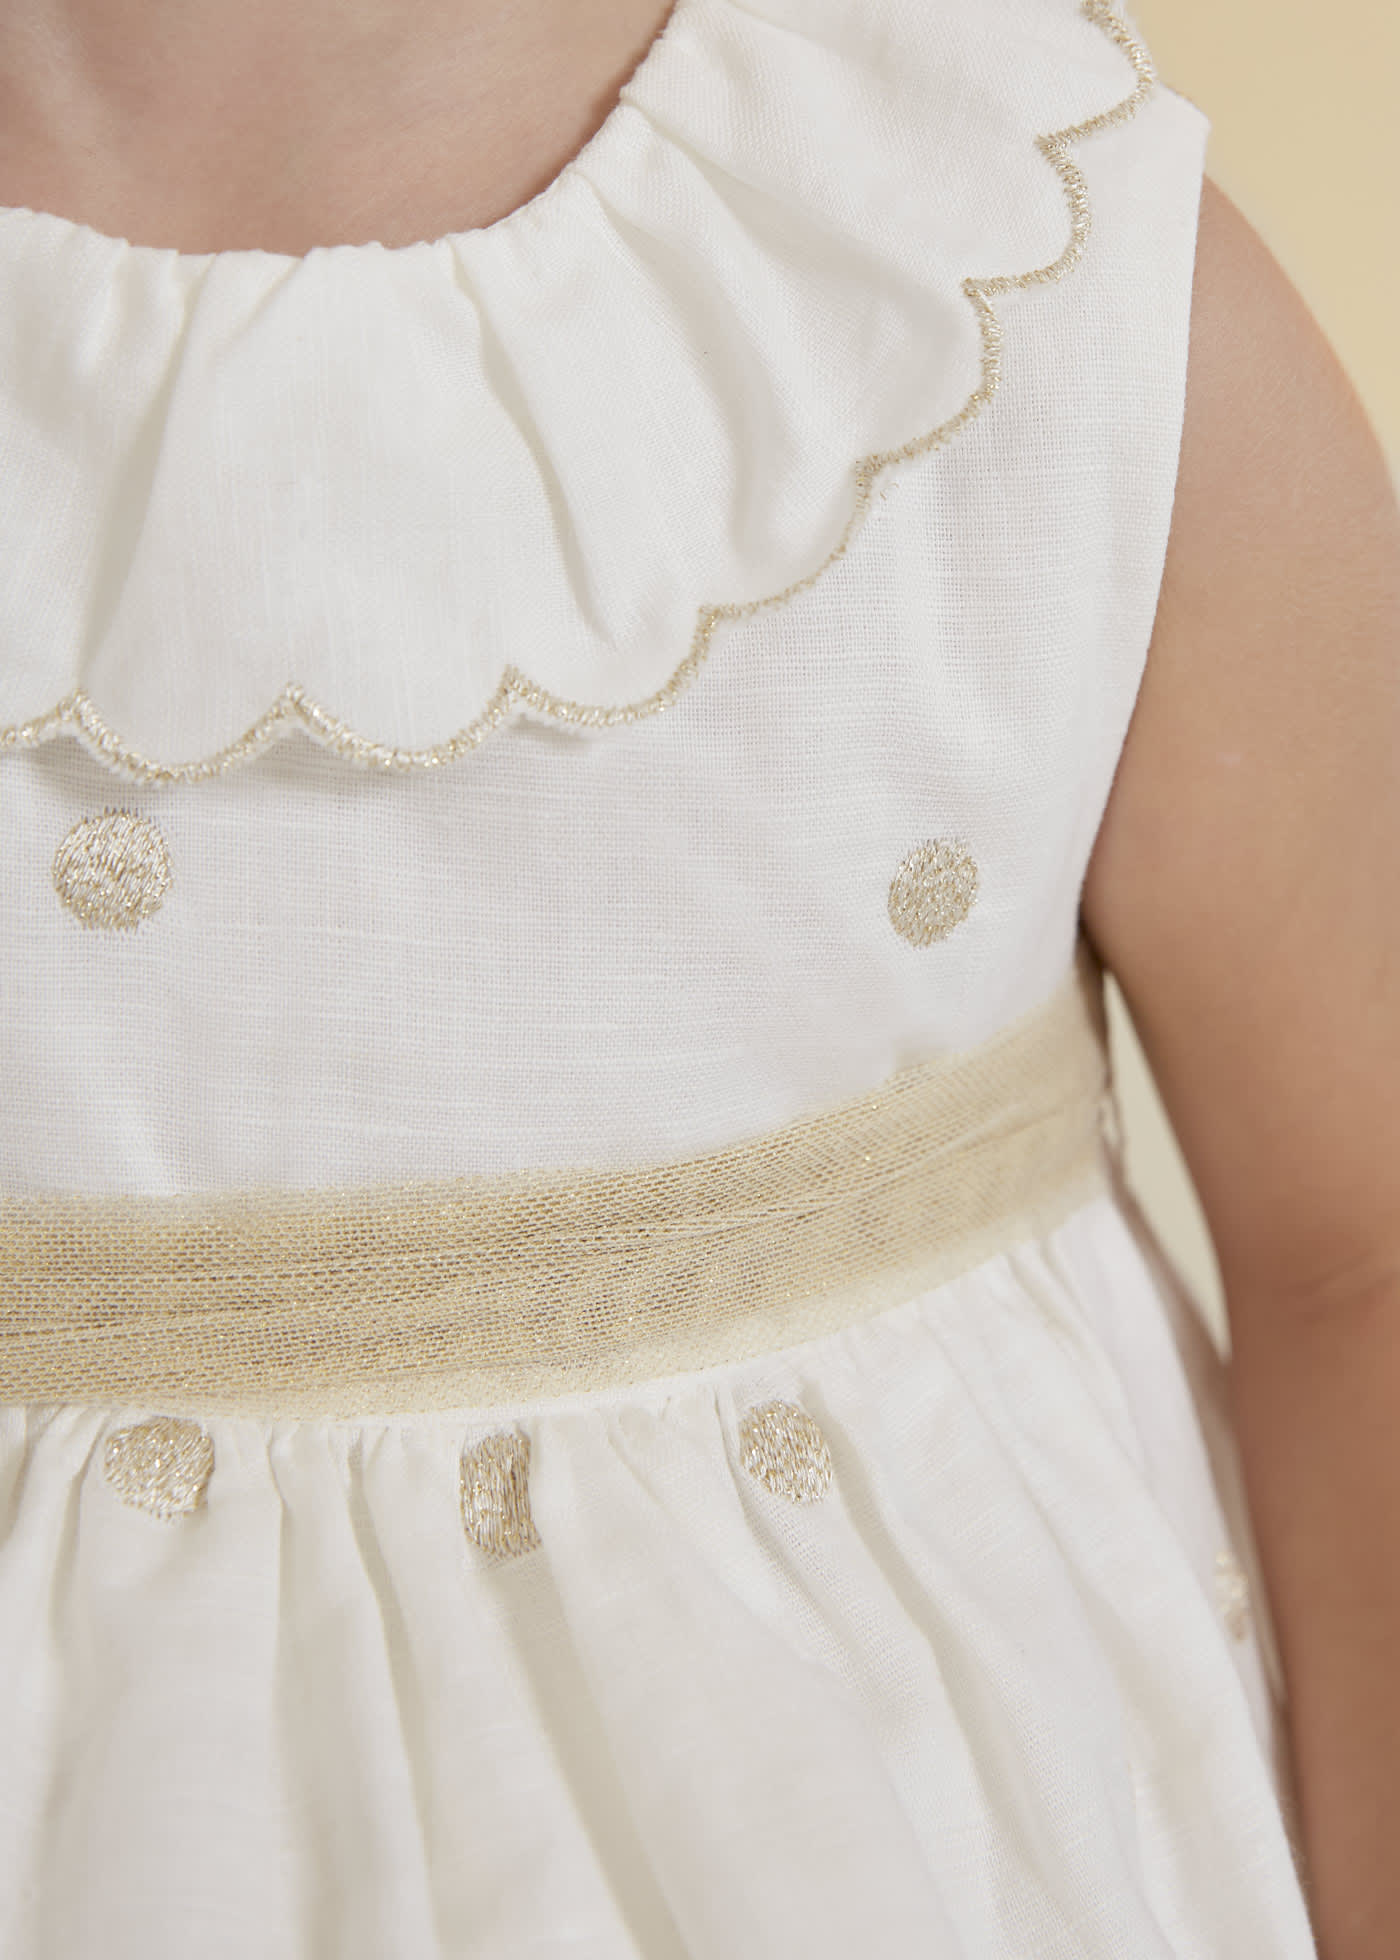 Linen embroidered polka dots dress